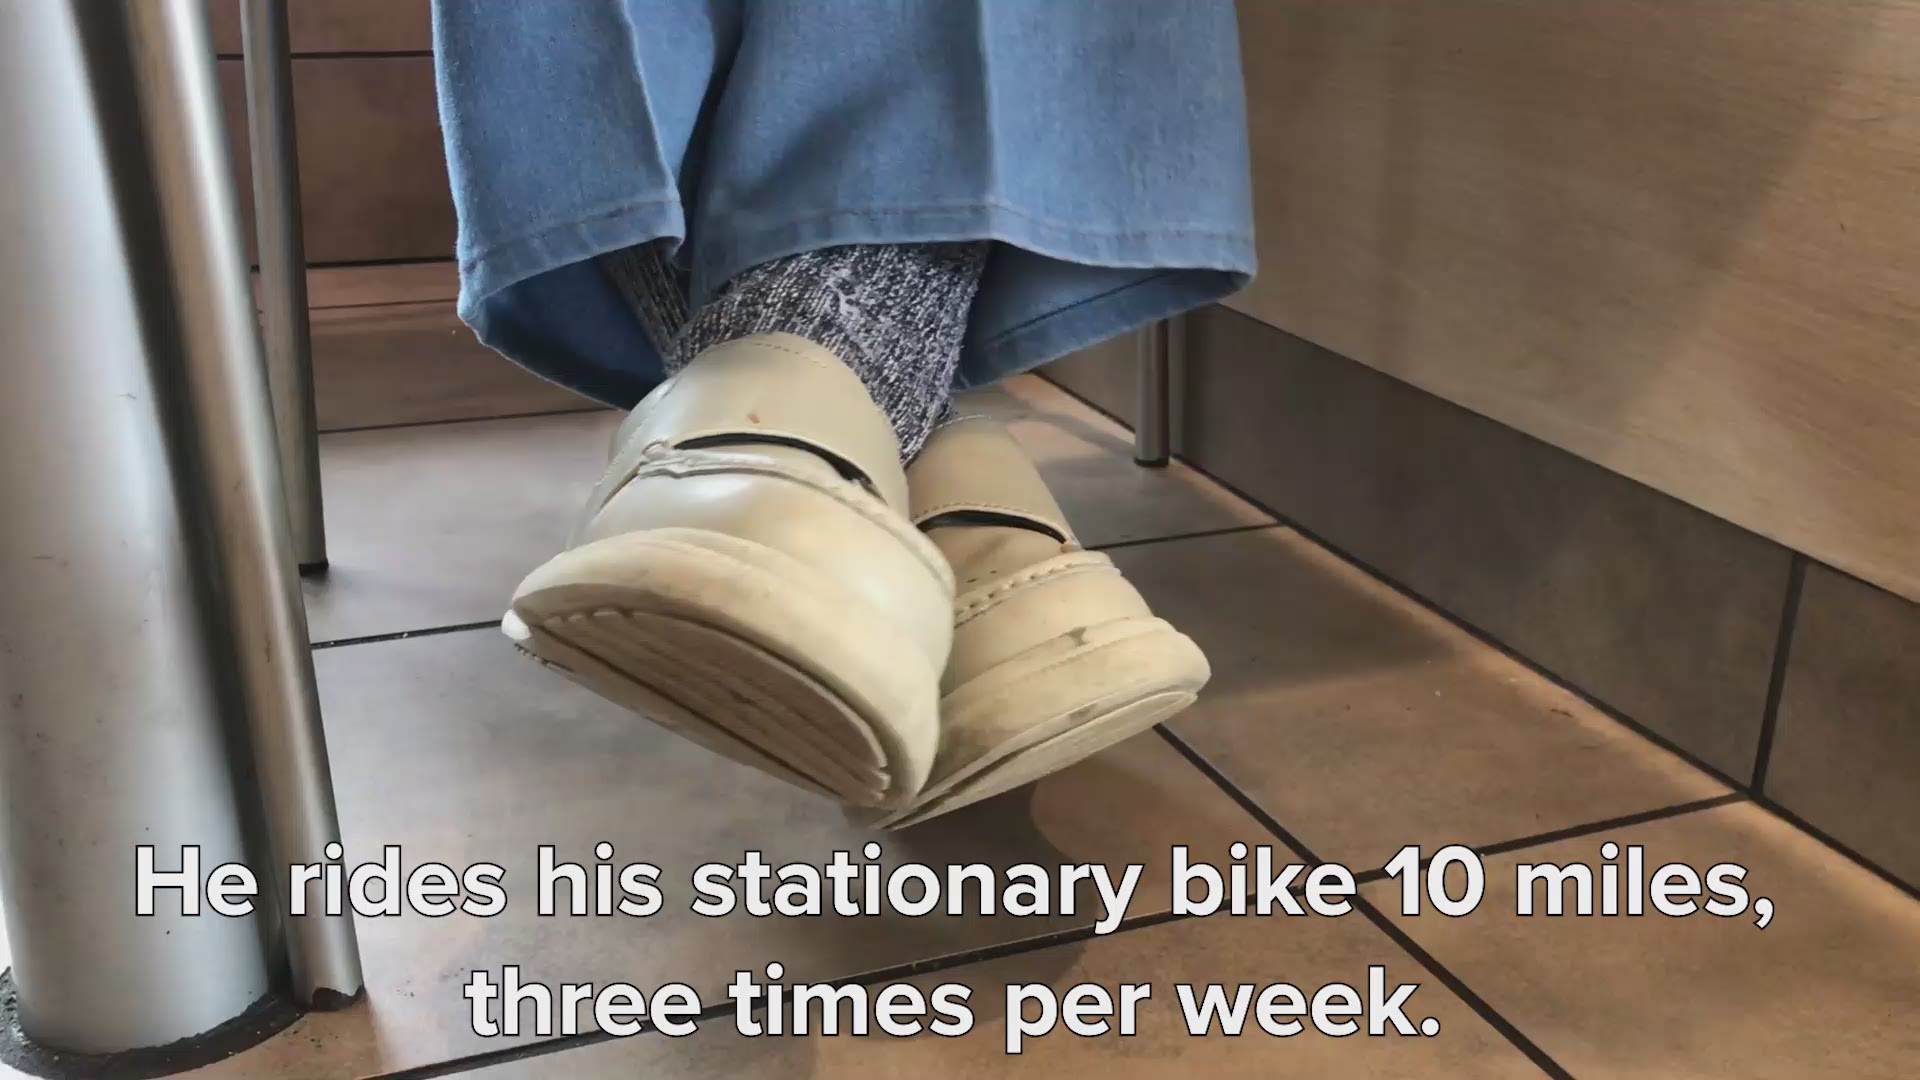 Fred Webb rides his stationary bike 10 miles, three times per week. After 45 years, he hit 70,000 miles. He celebrated by bringing cookies to his nearly daily meeting with his friends at McDonald's.